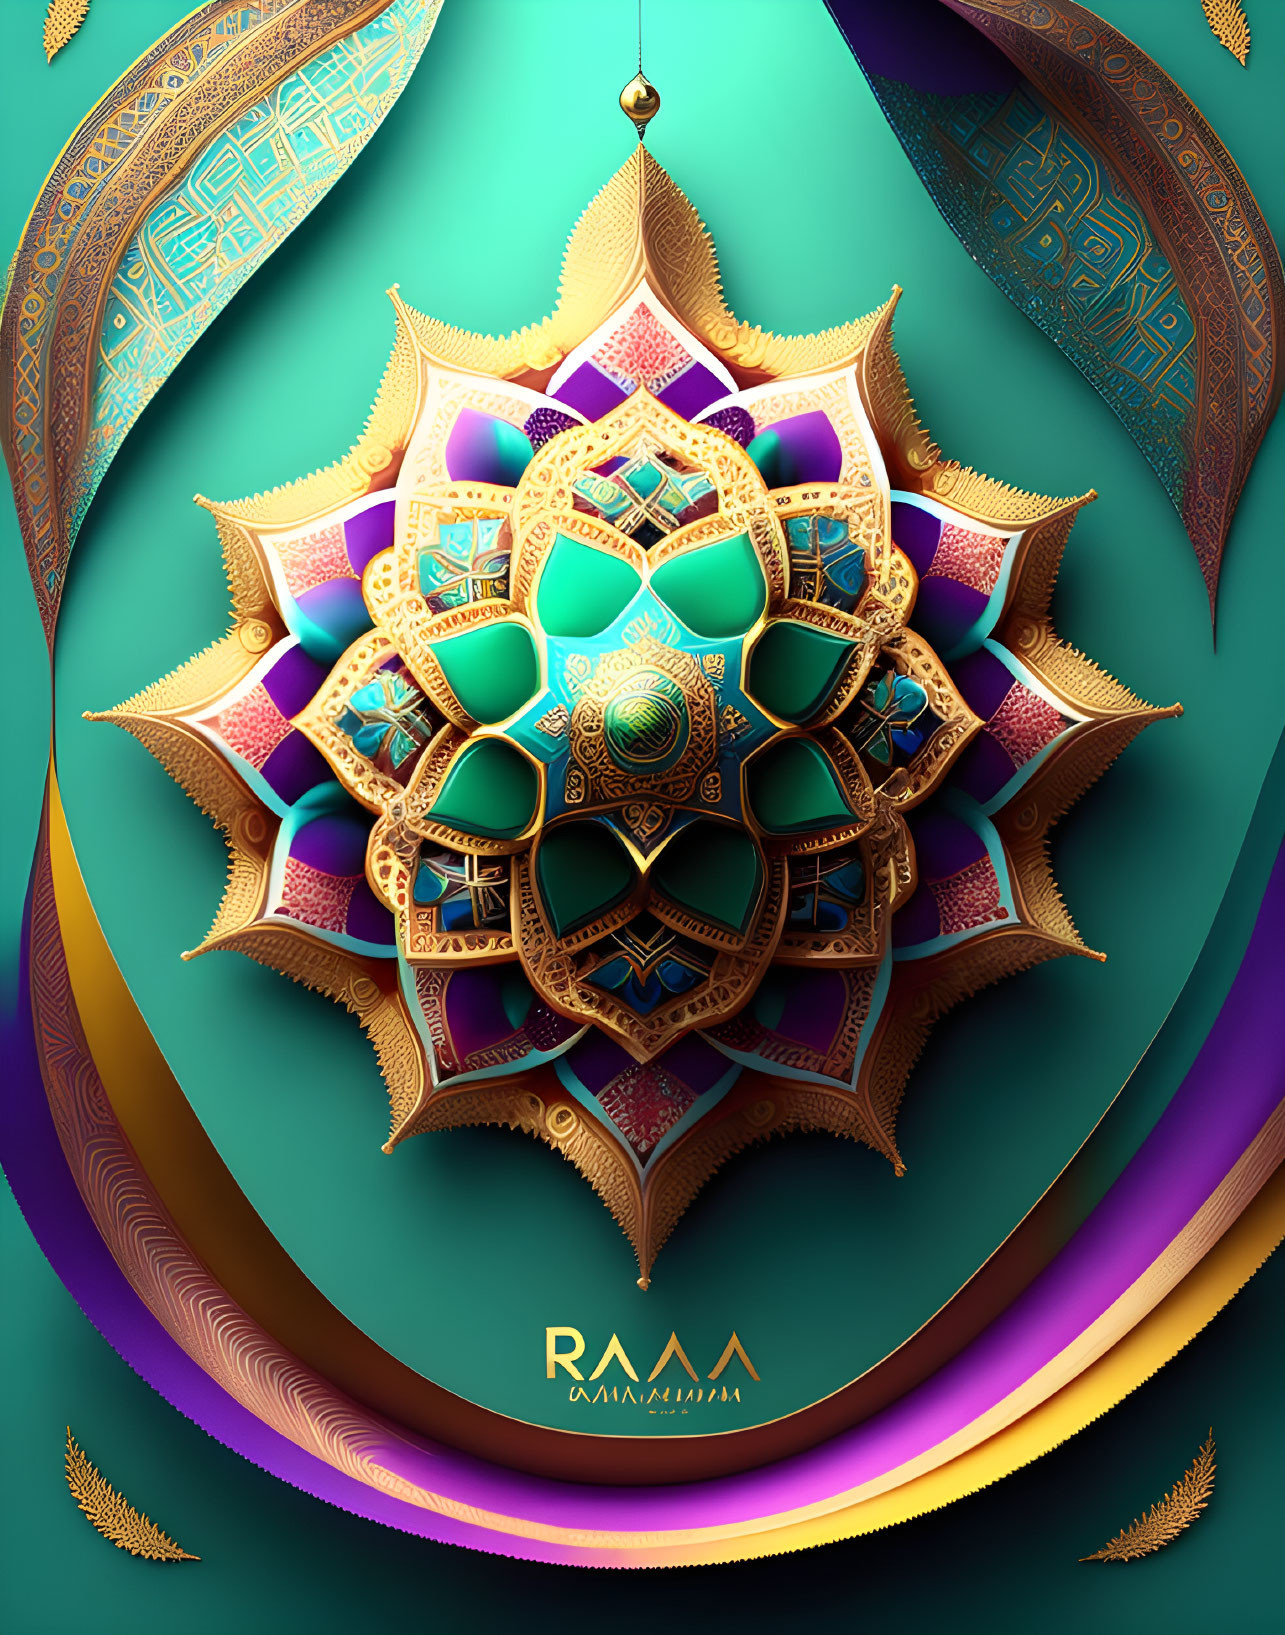 Symmetrical ornate mandala in gold, purple, and turquoise hues on teal background